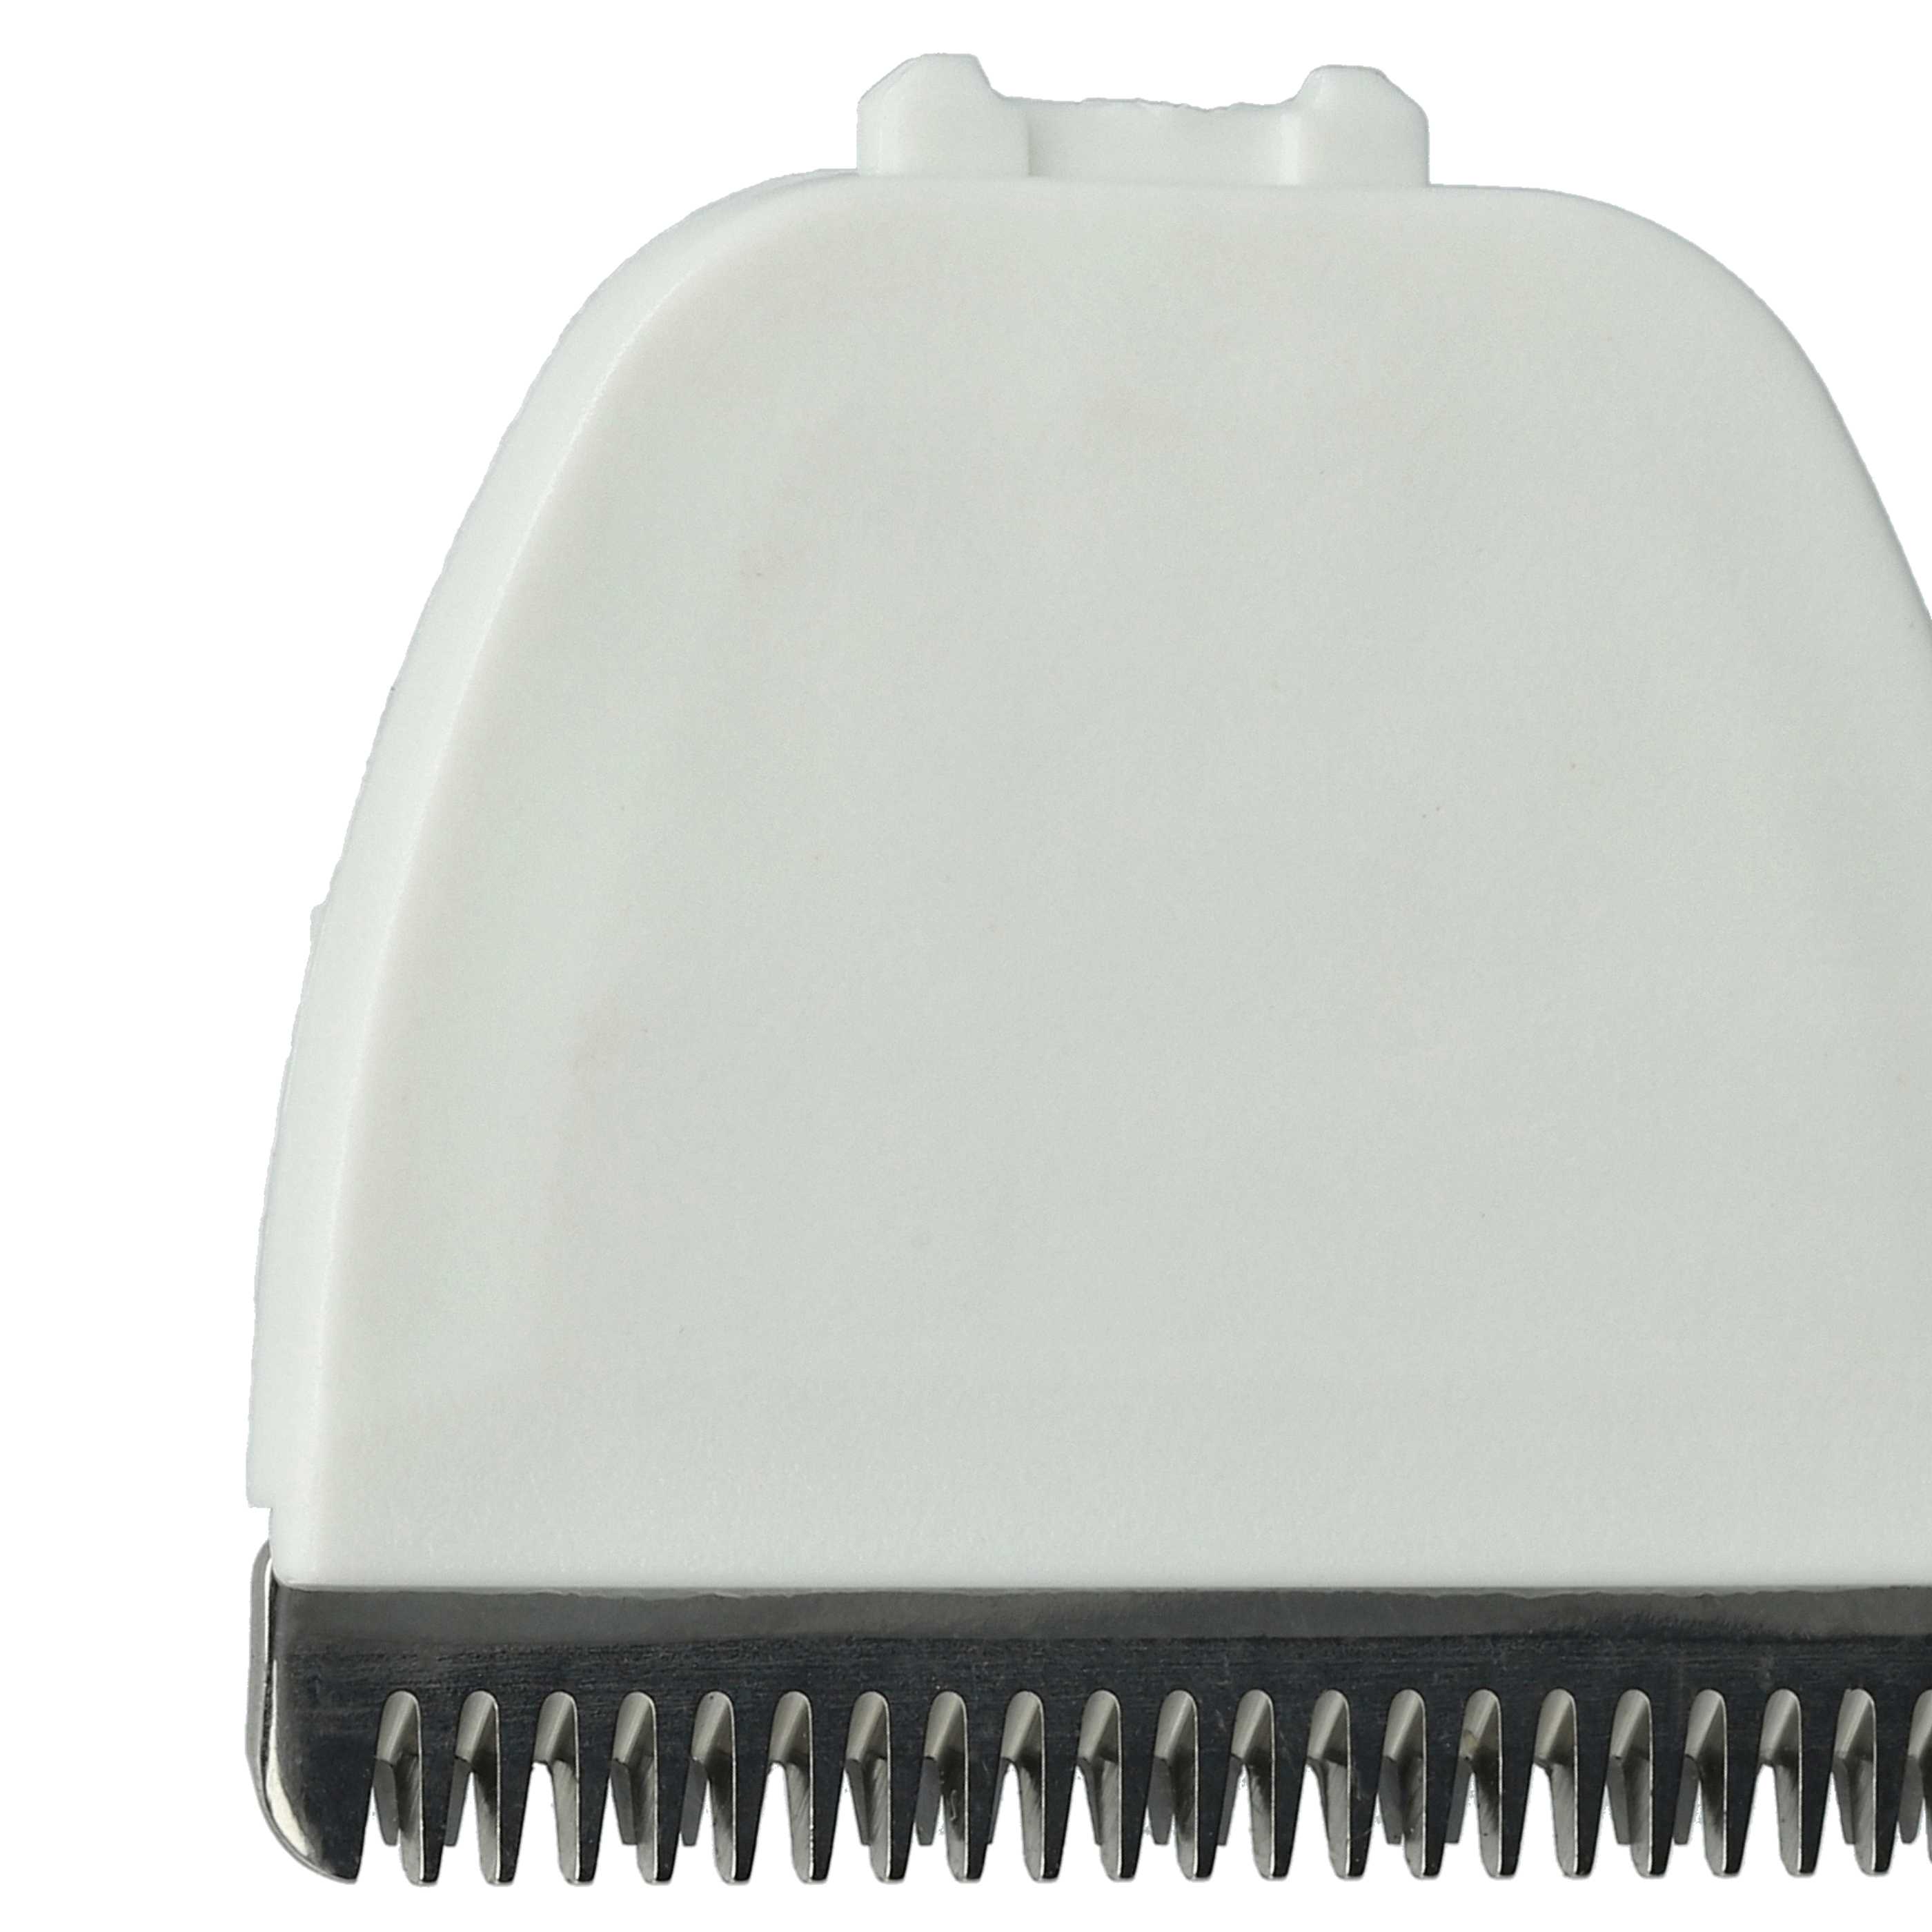 Shaving Head as Replacement for Panasonic WER9714Y, WER9714 for Panasonic Razors - Electric Razor Parts